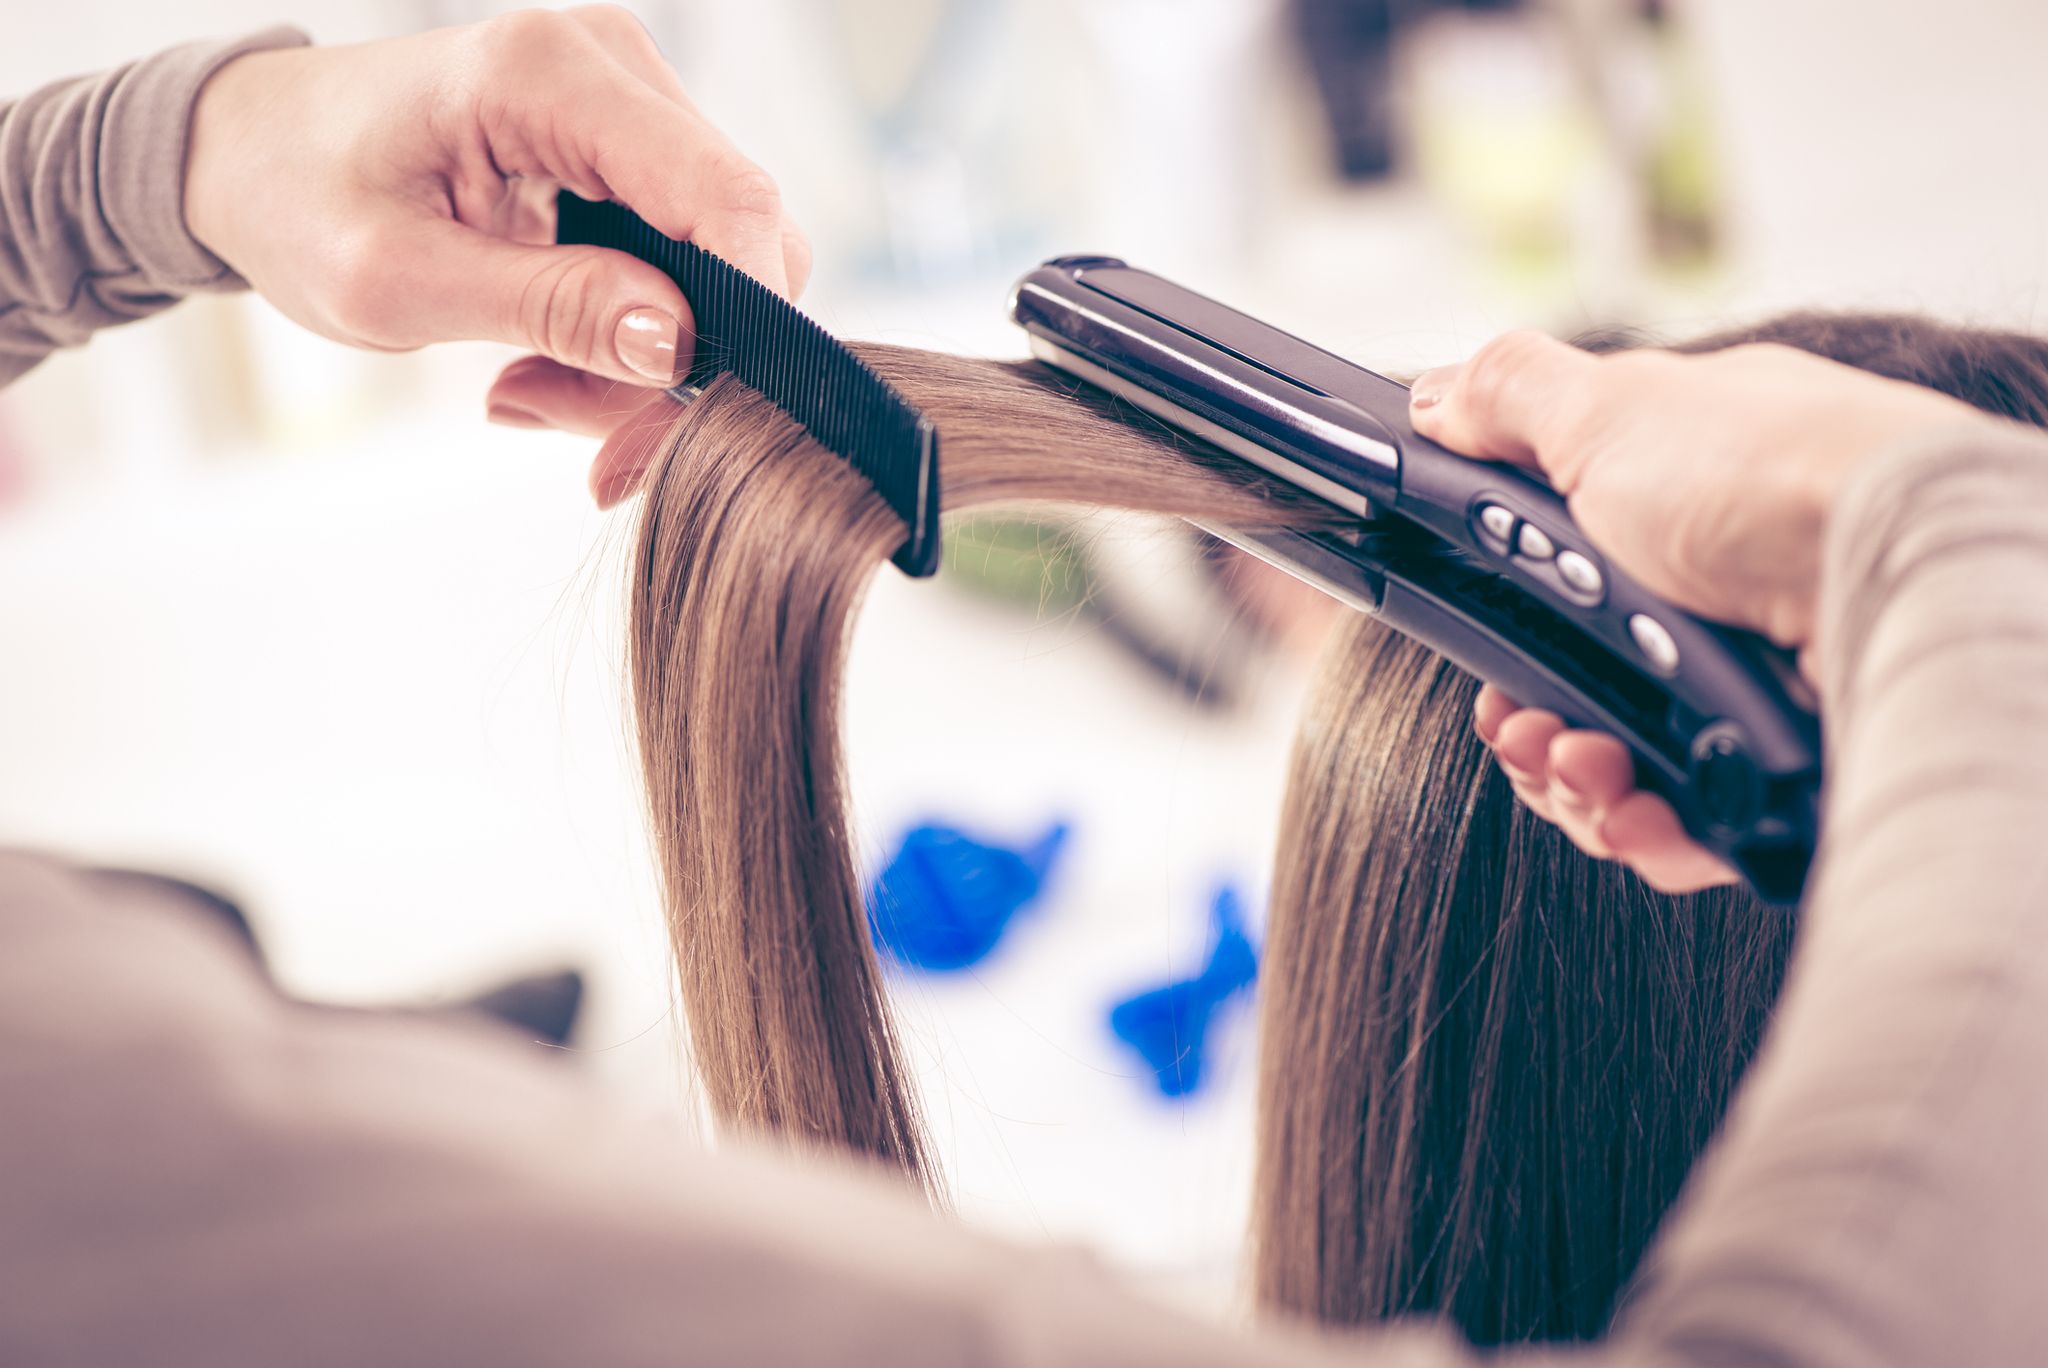 What Are the Risks of DIY Hair Treatment Service at Home?